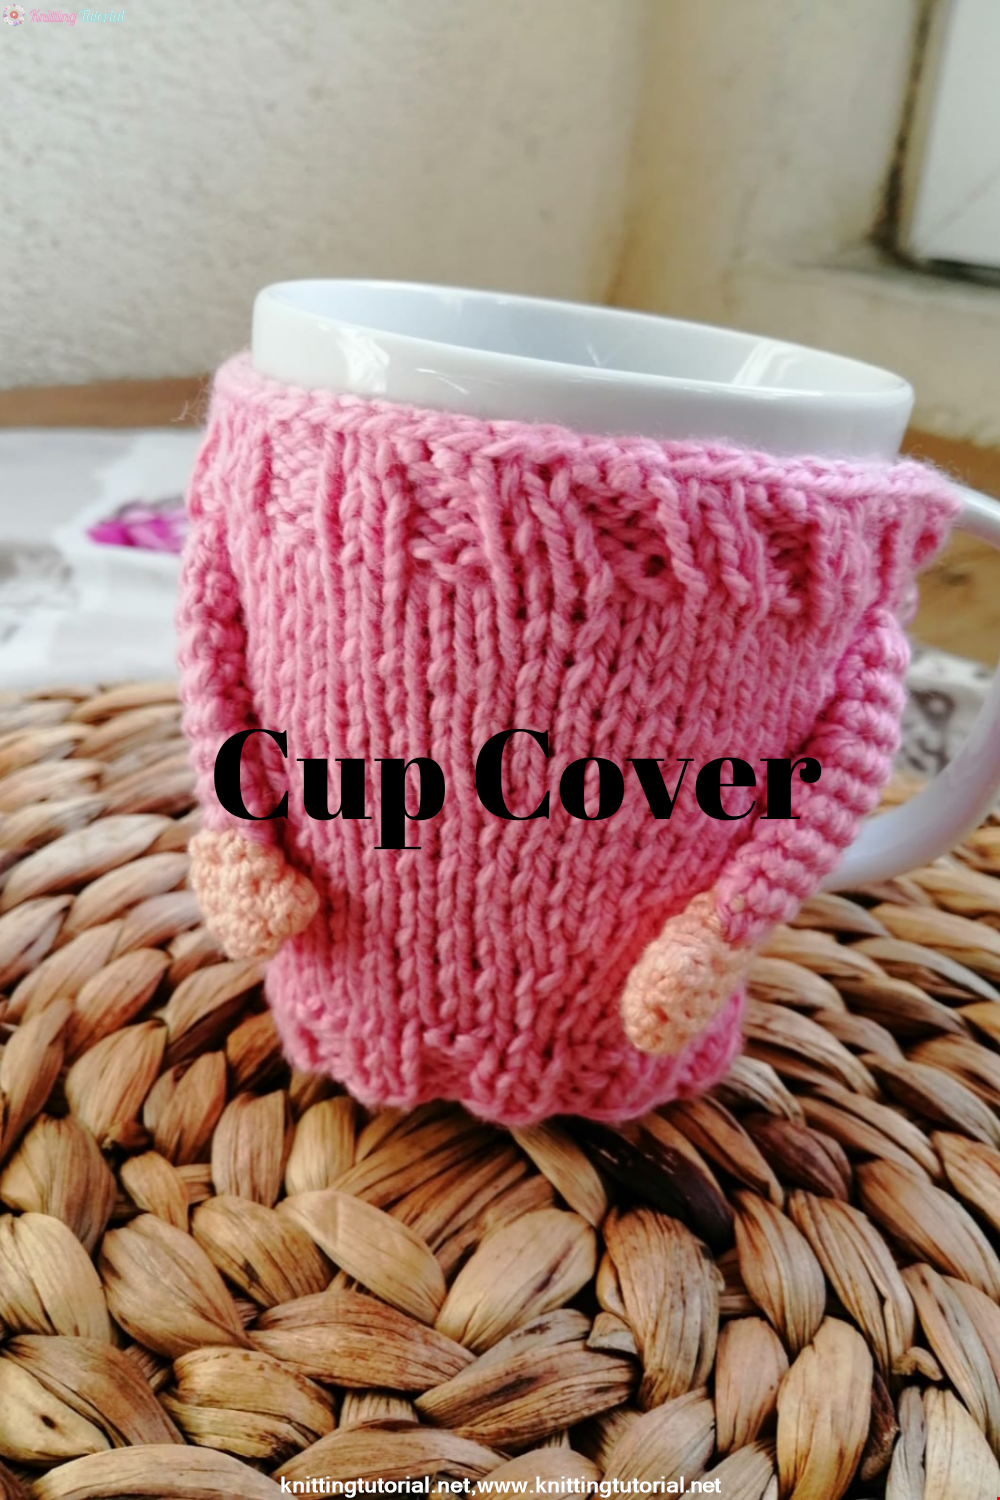 Making the Cup Cover pink